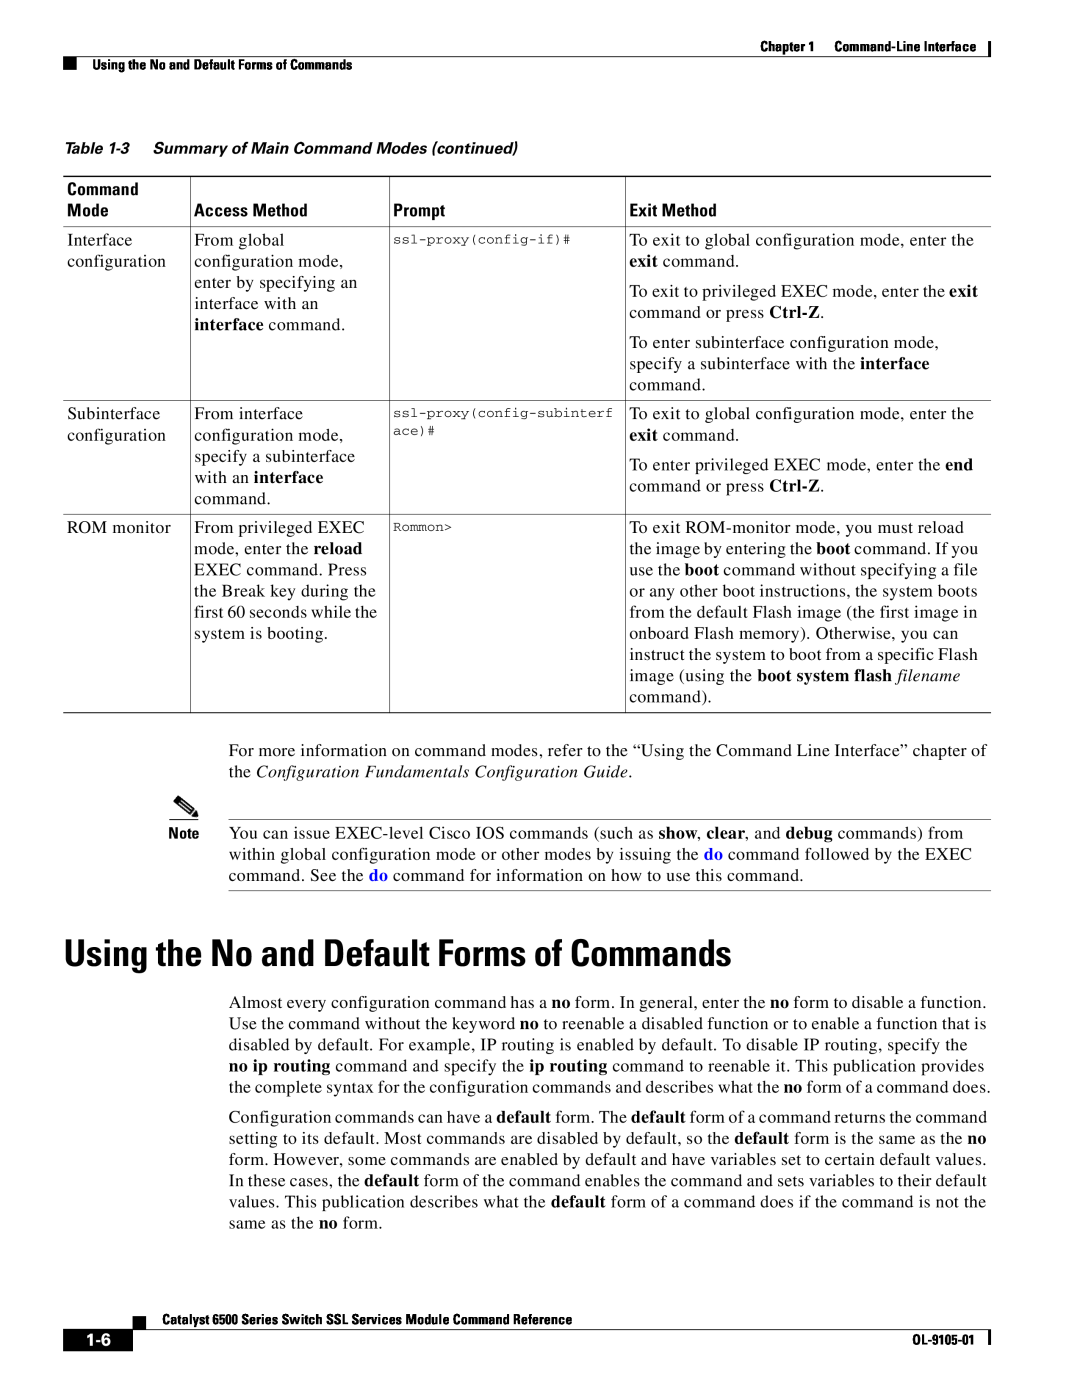 Cisco Systems 6500 Using the No and Default Forms of Commands, interface command, with an interface, Mode, Access Method 